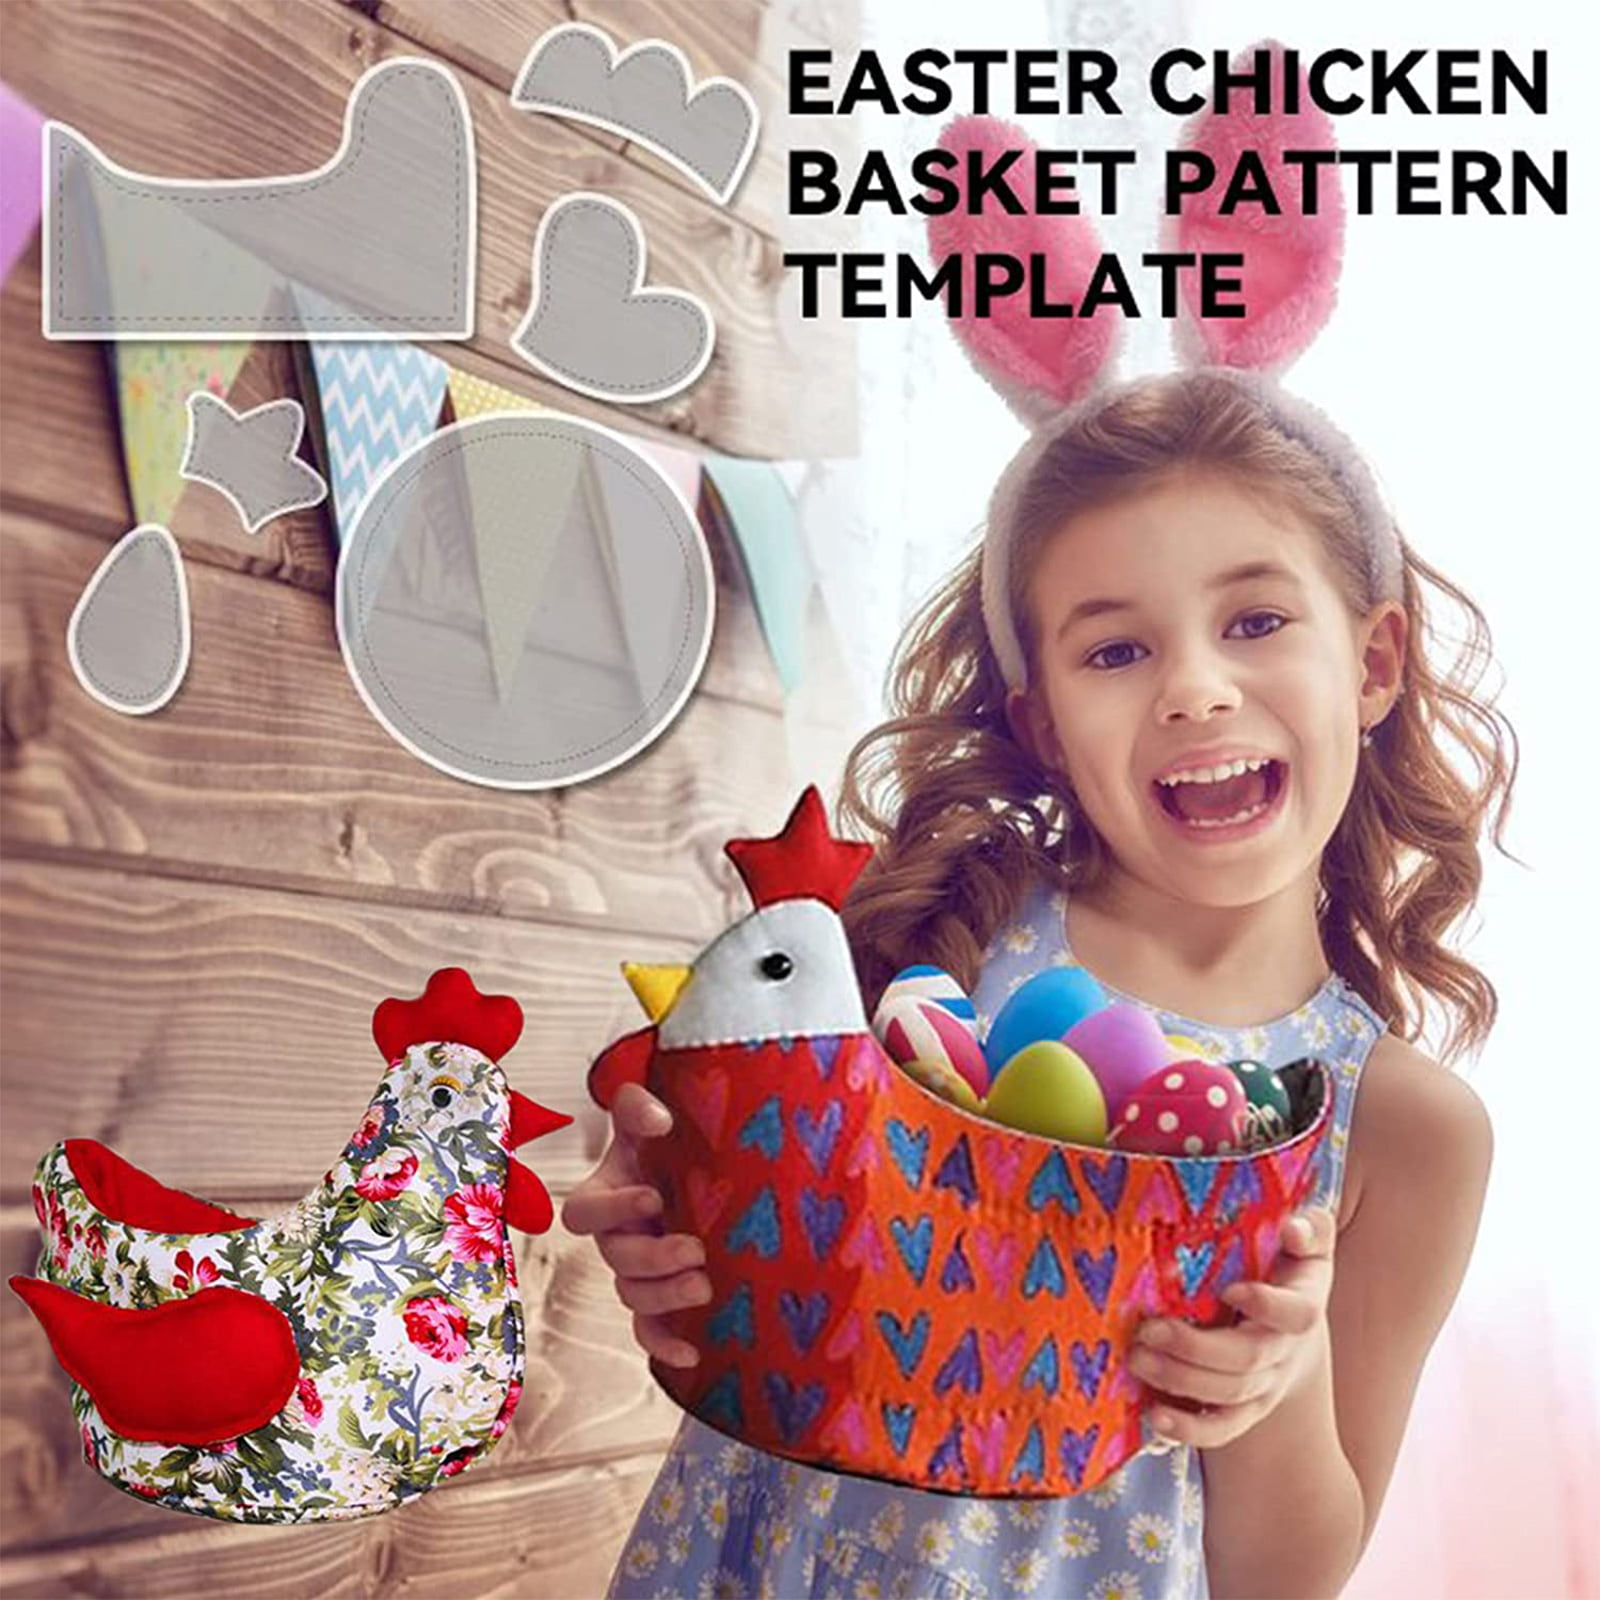 Size : 8inch Candy & Snacks DIY Creative Quilting Rulers Set for Eggs Cookies 6pcs Acrylic Easter Chicken Basket Template with Illustrate PENGYMY Cute Chick Basket Bag Pattern Template 